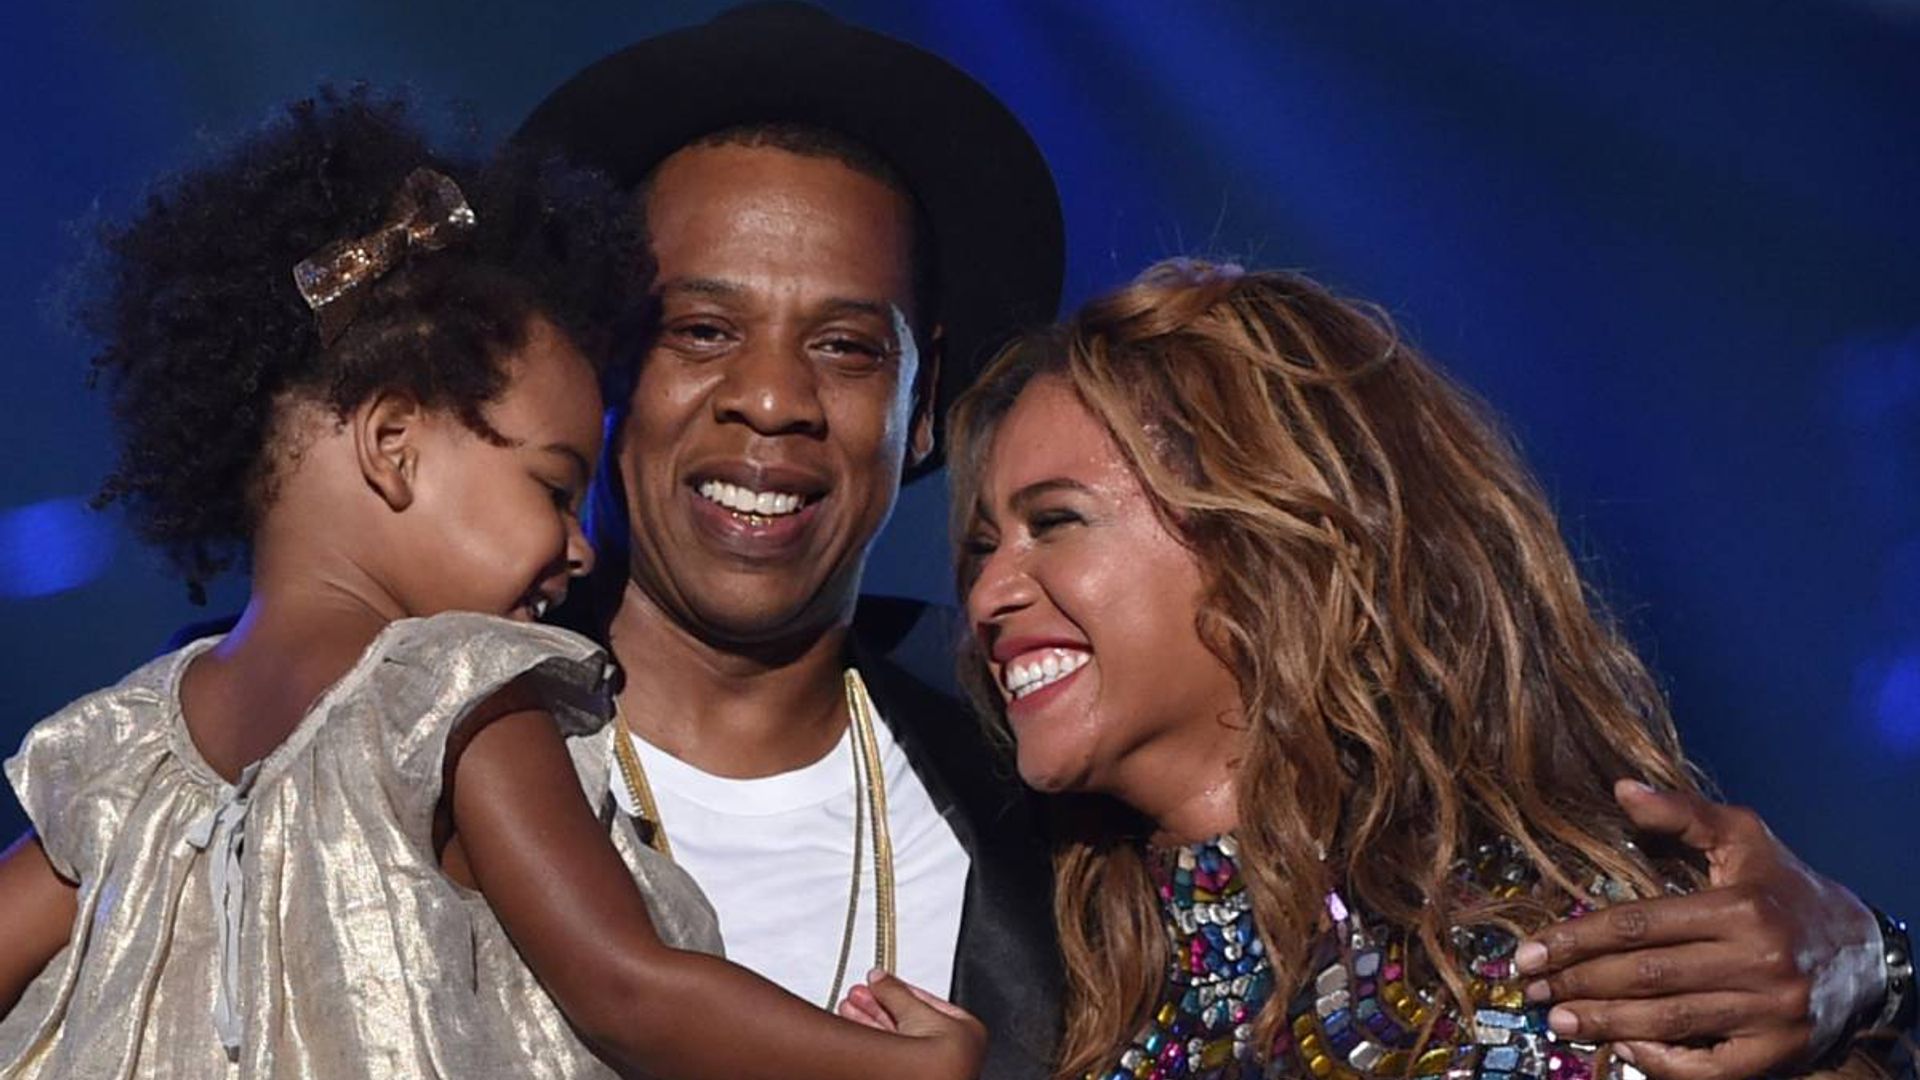 Beyonce's Daughter Blue Ivy's Hair Pulled by Fan During Concert Incident - wide 3